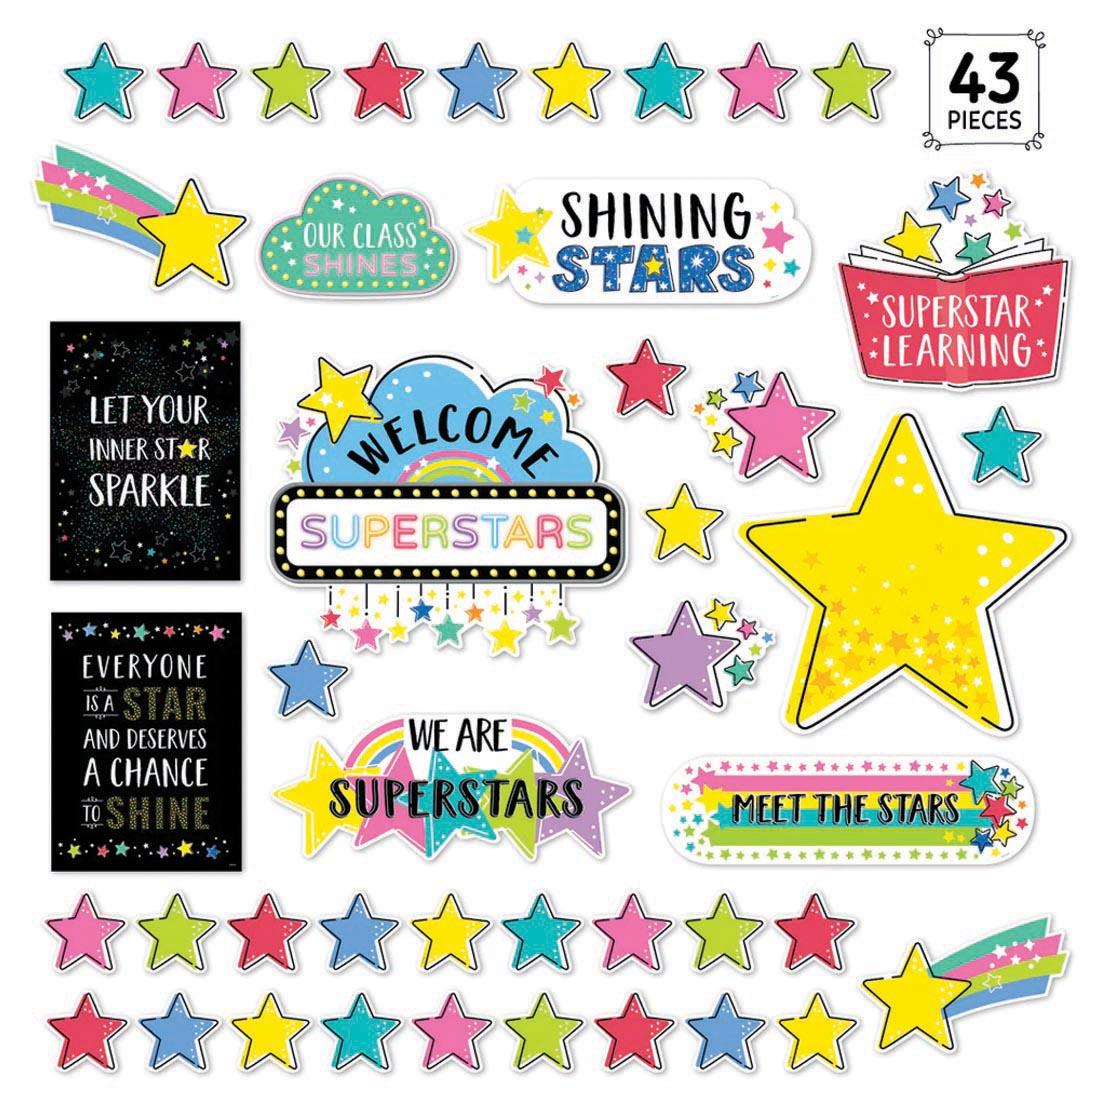 Shine Bright Bulletin Board Set from the Star Bright collection by Creative Teaching Press with the text 43 PIECES